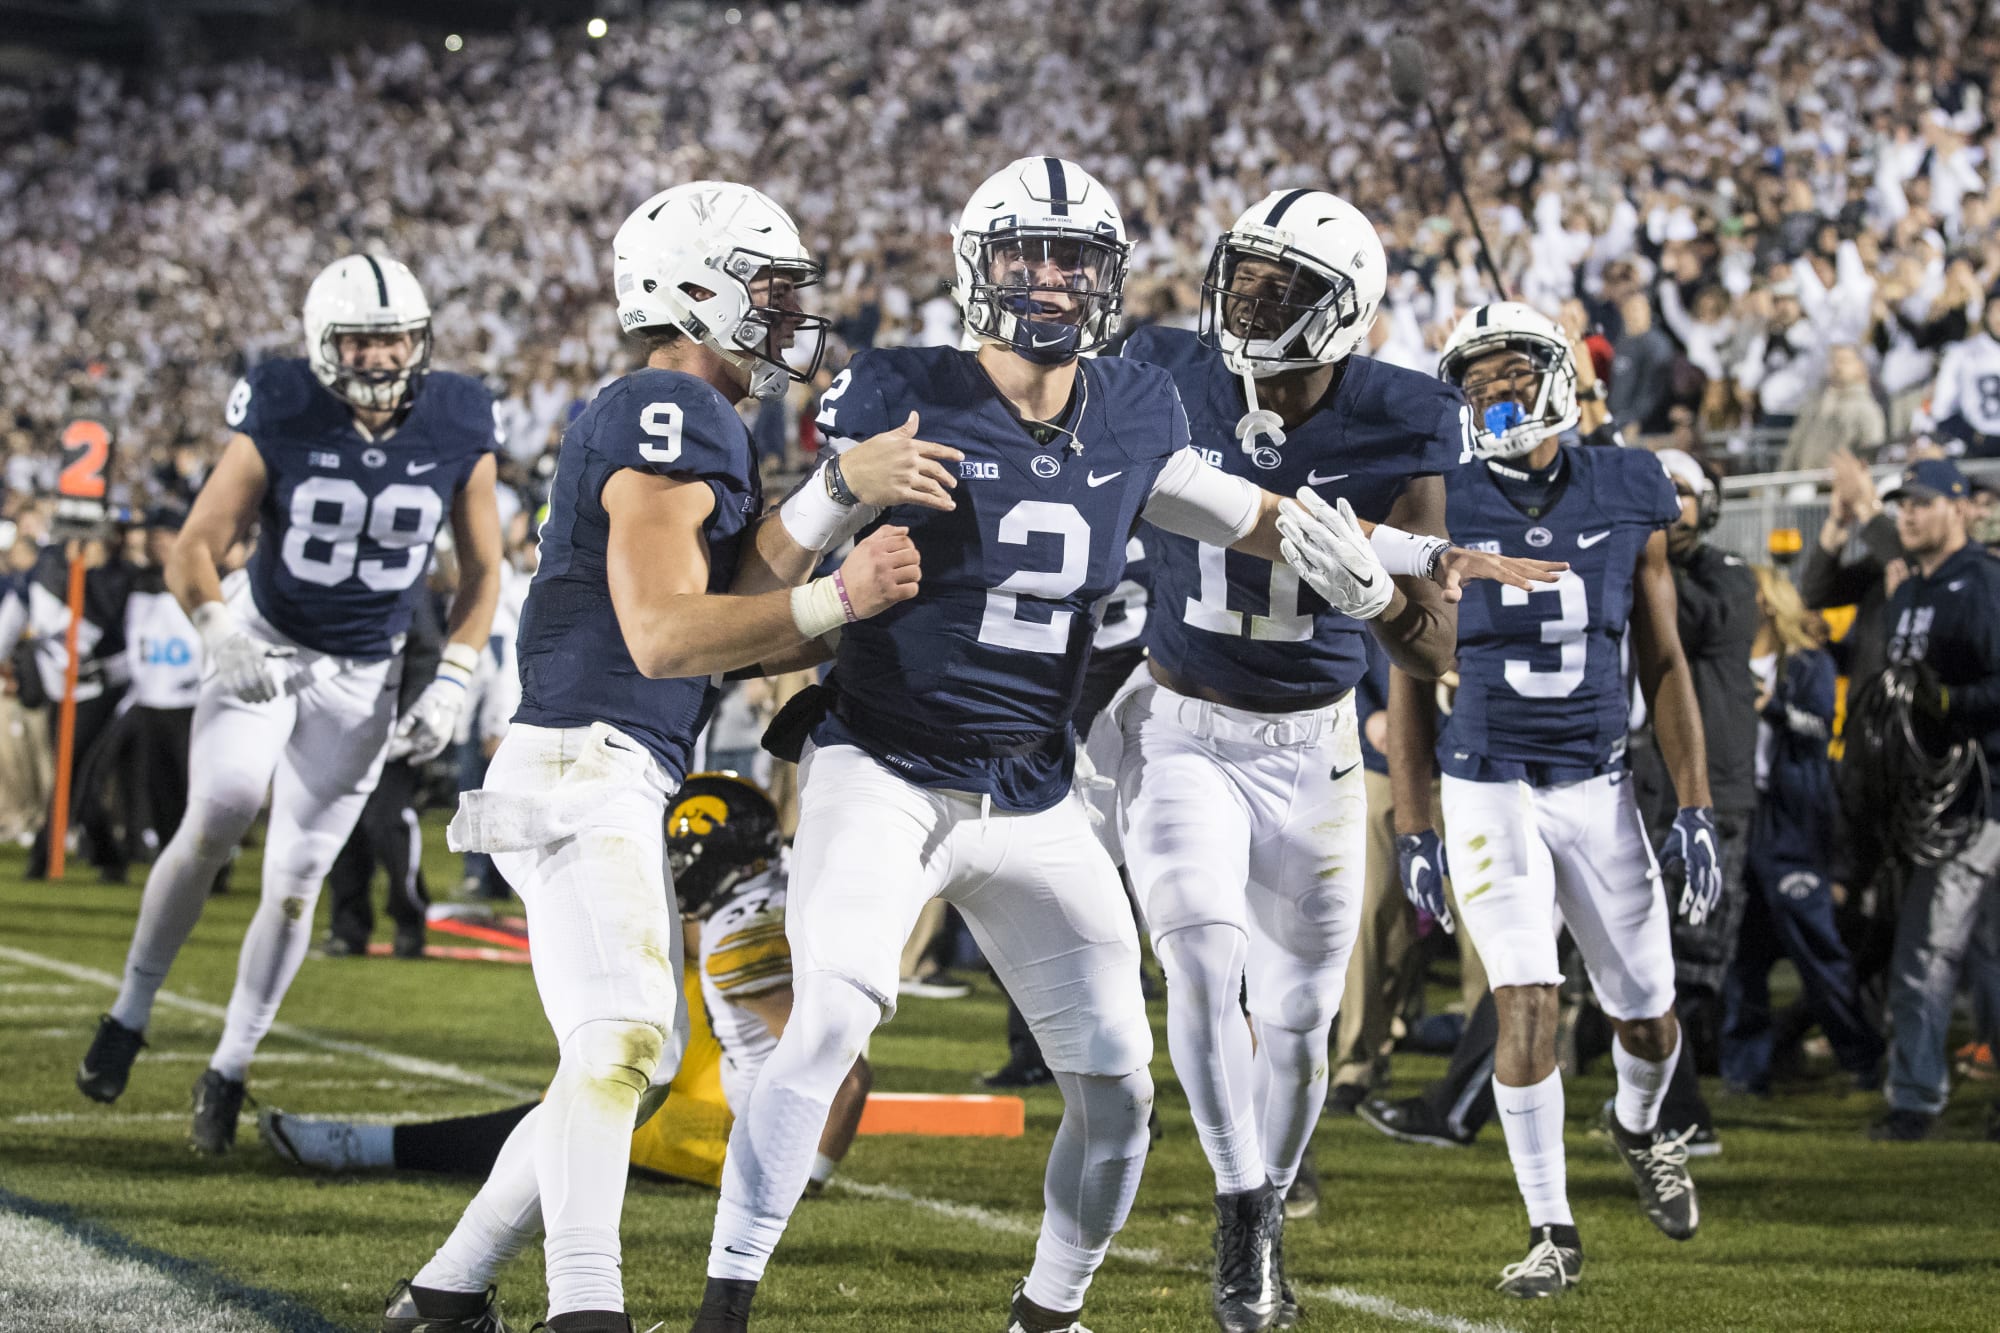 Penn State Football: Nittany Lions should be favorite to win Big 10 again